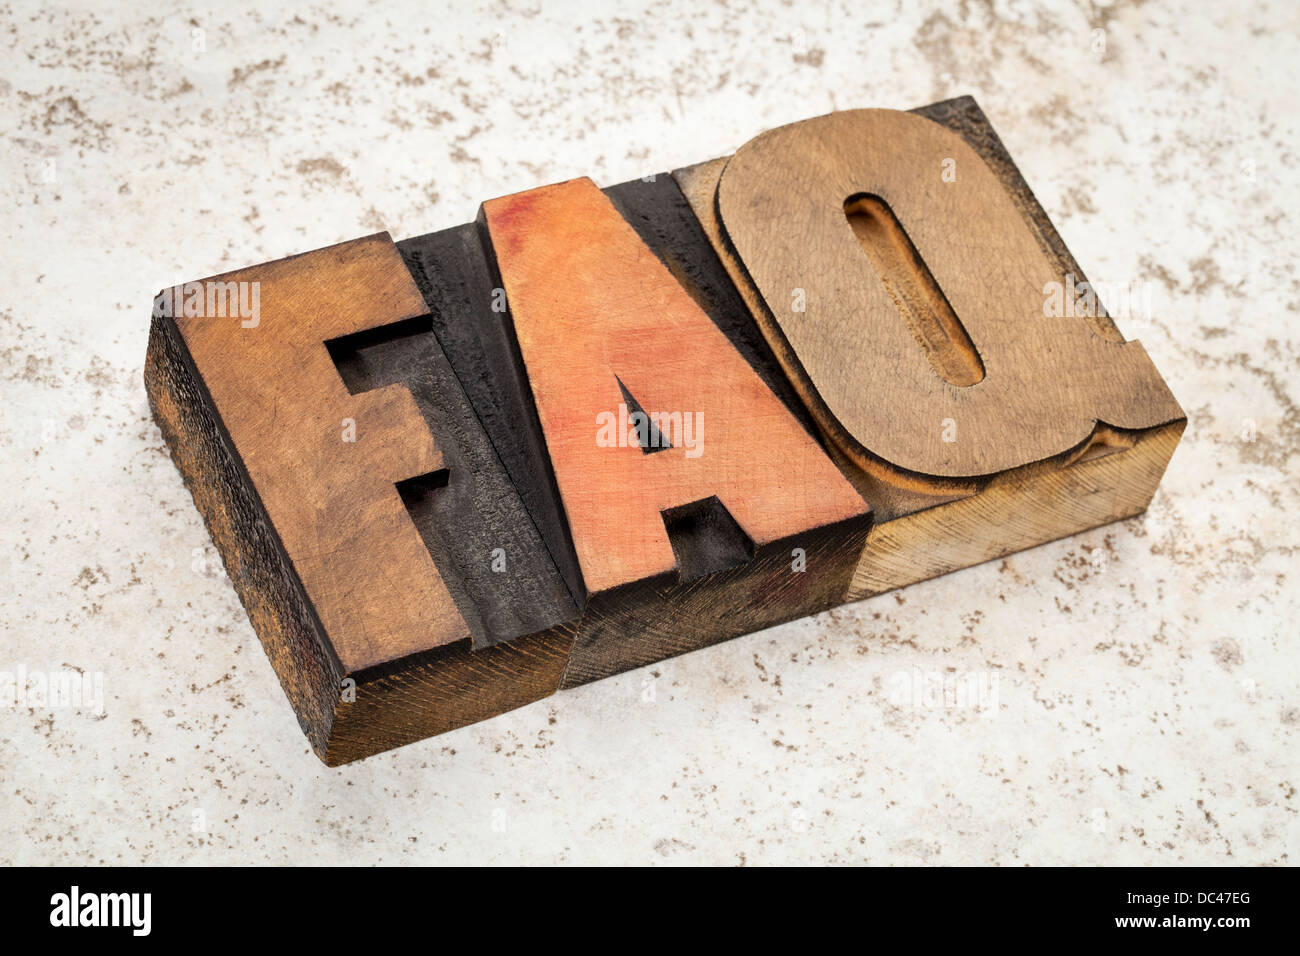 frequently asked questions - FAQ acronym - text in vintage letterpress wood type on a ceramic tile background Stock Photo